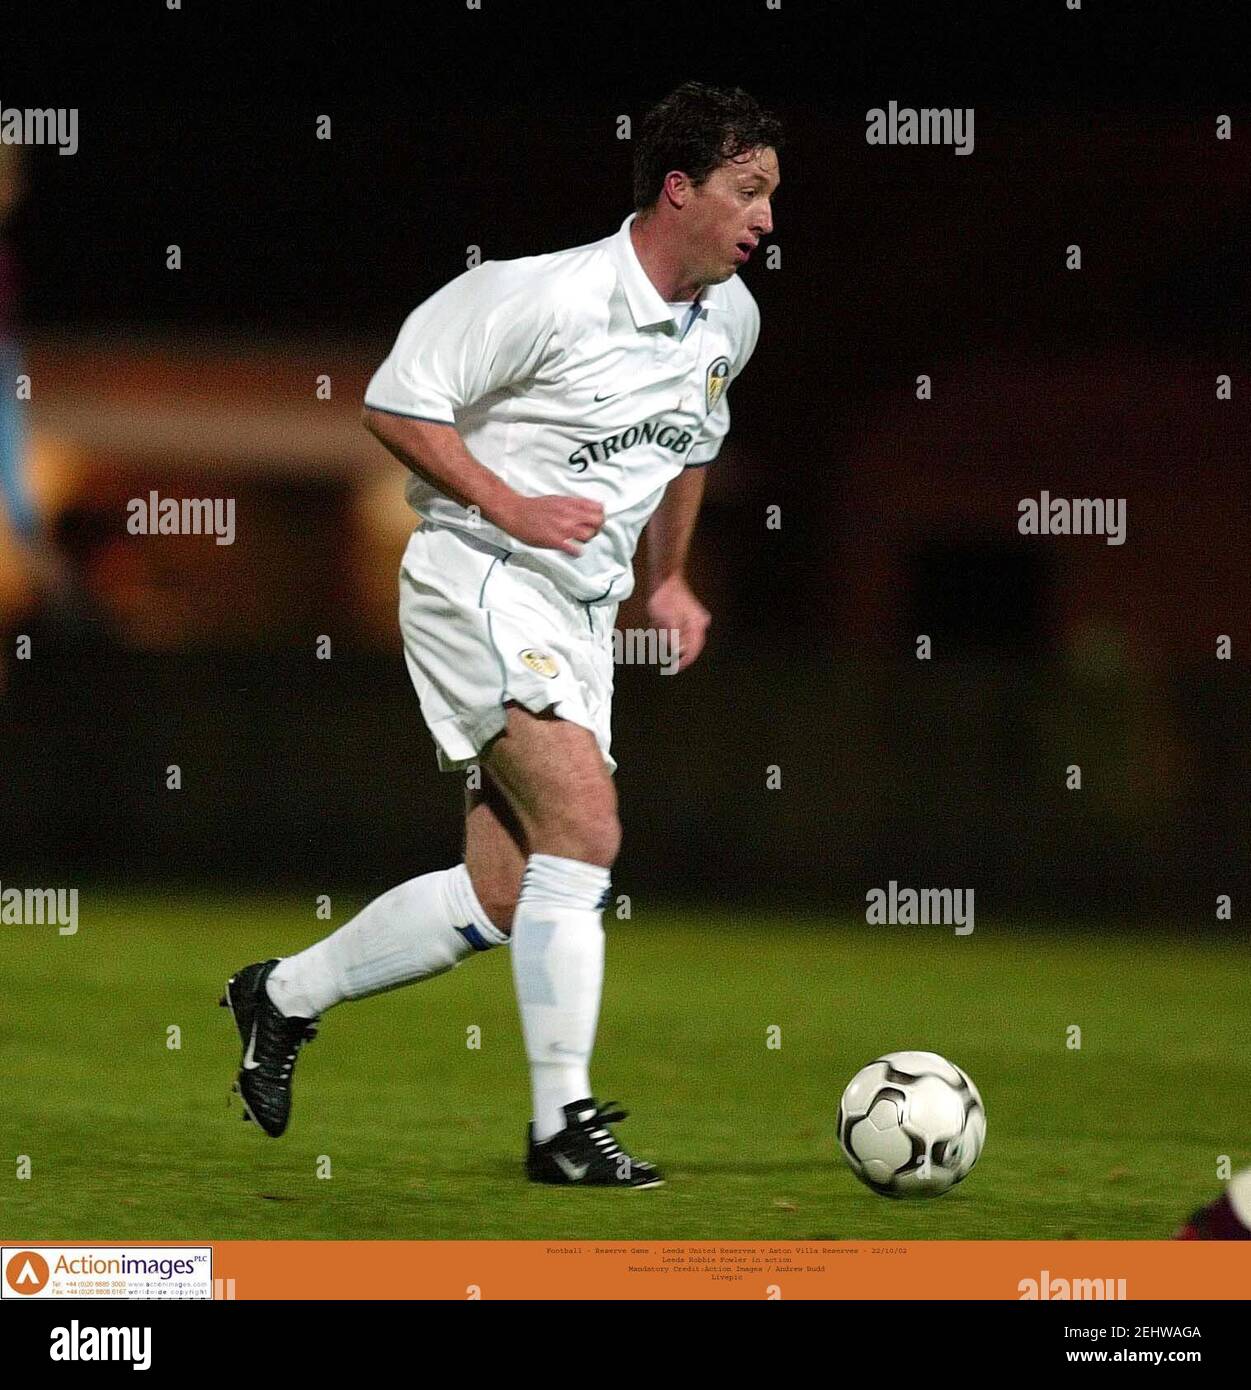 Football - Reserve Game , Leeds United Reserves v Aston Villa Reserves - 22/10/02  Leeds Robbie Fowler in action  Mandatory Credit:Action Images / Andrew Budd  Livepic Stock Photo